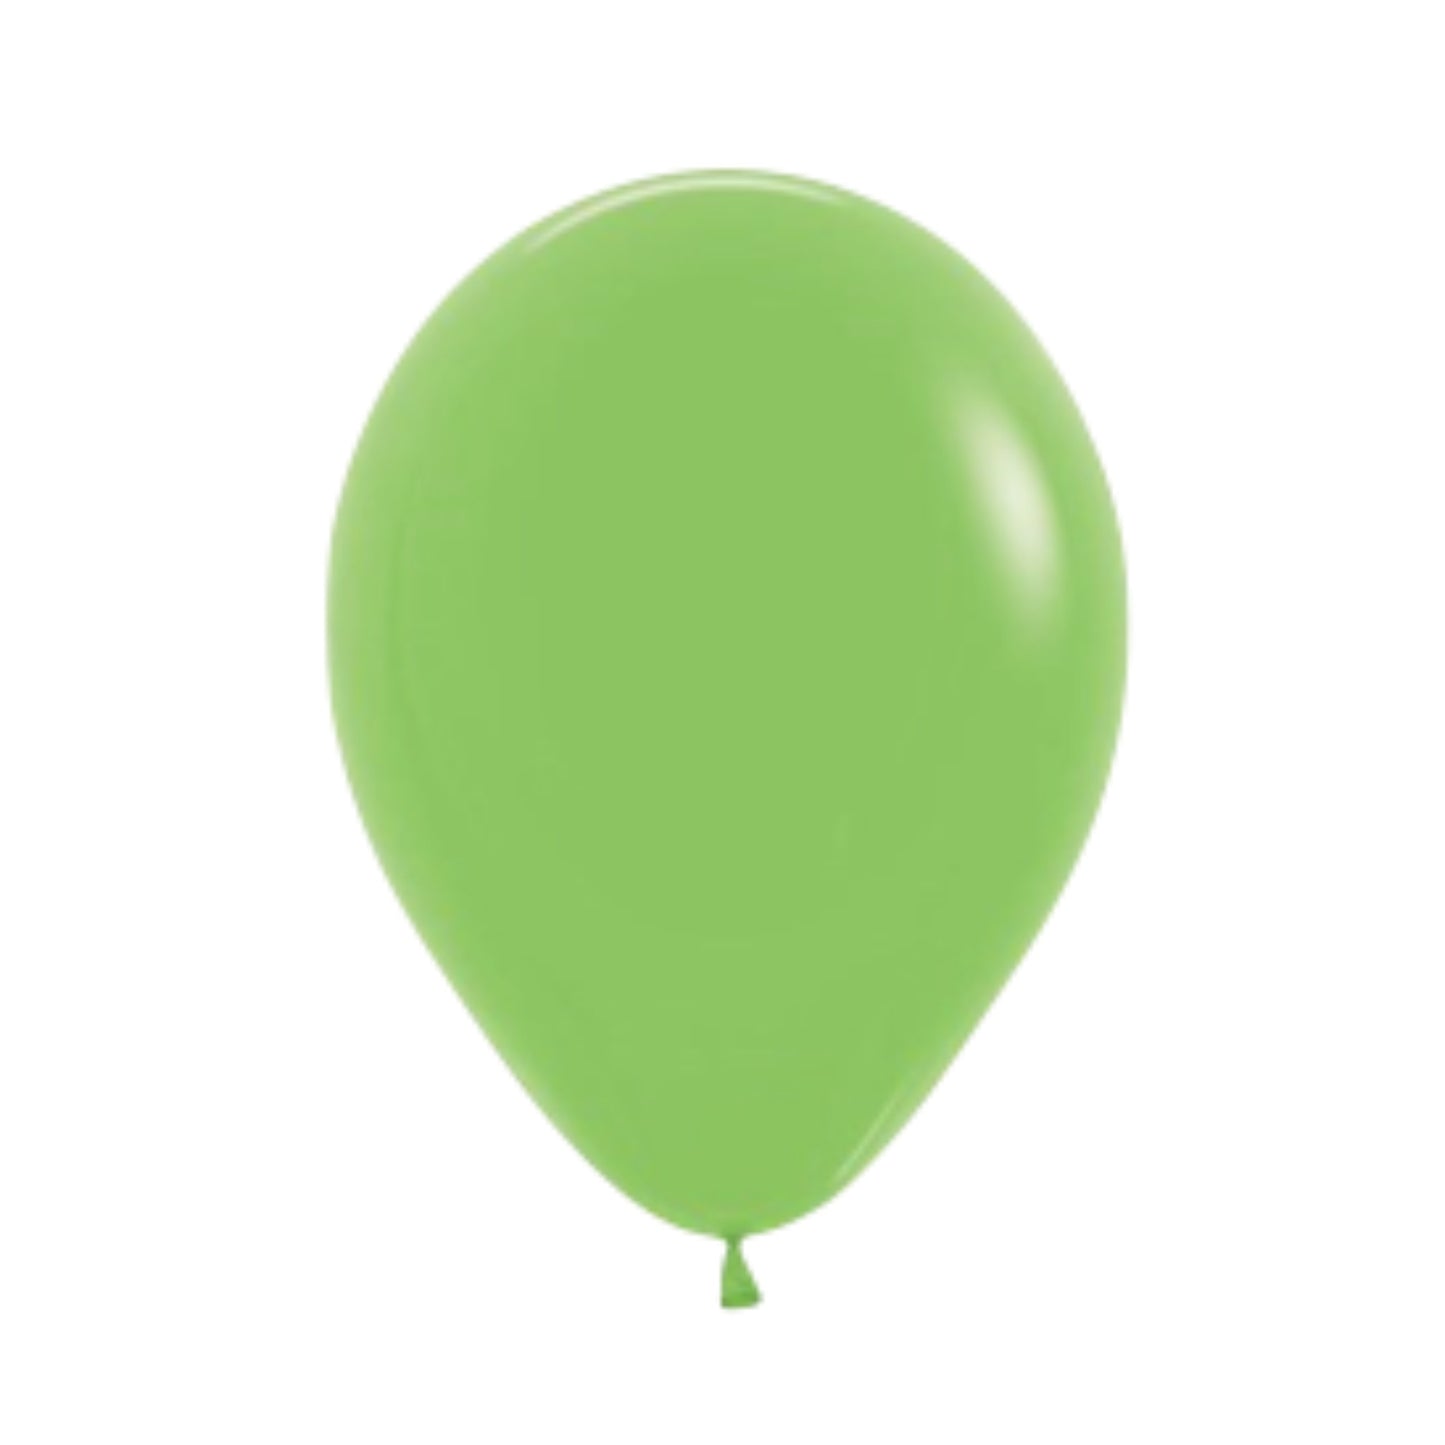 30cm standard size Lime Green coloured balloon. Helium quality